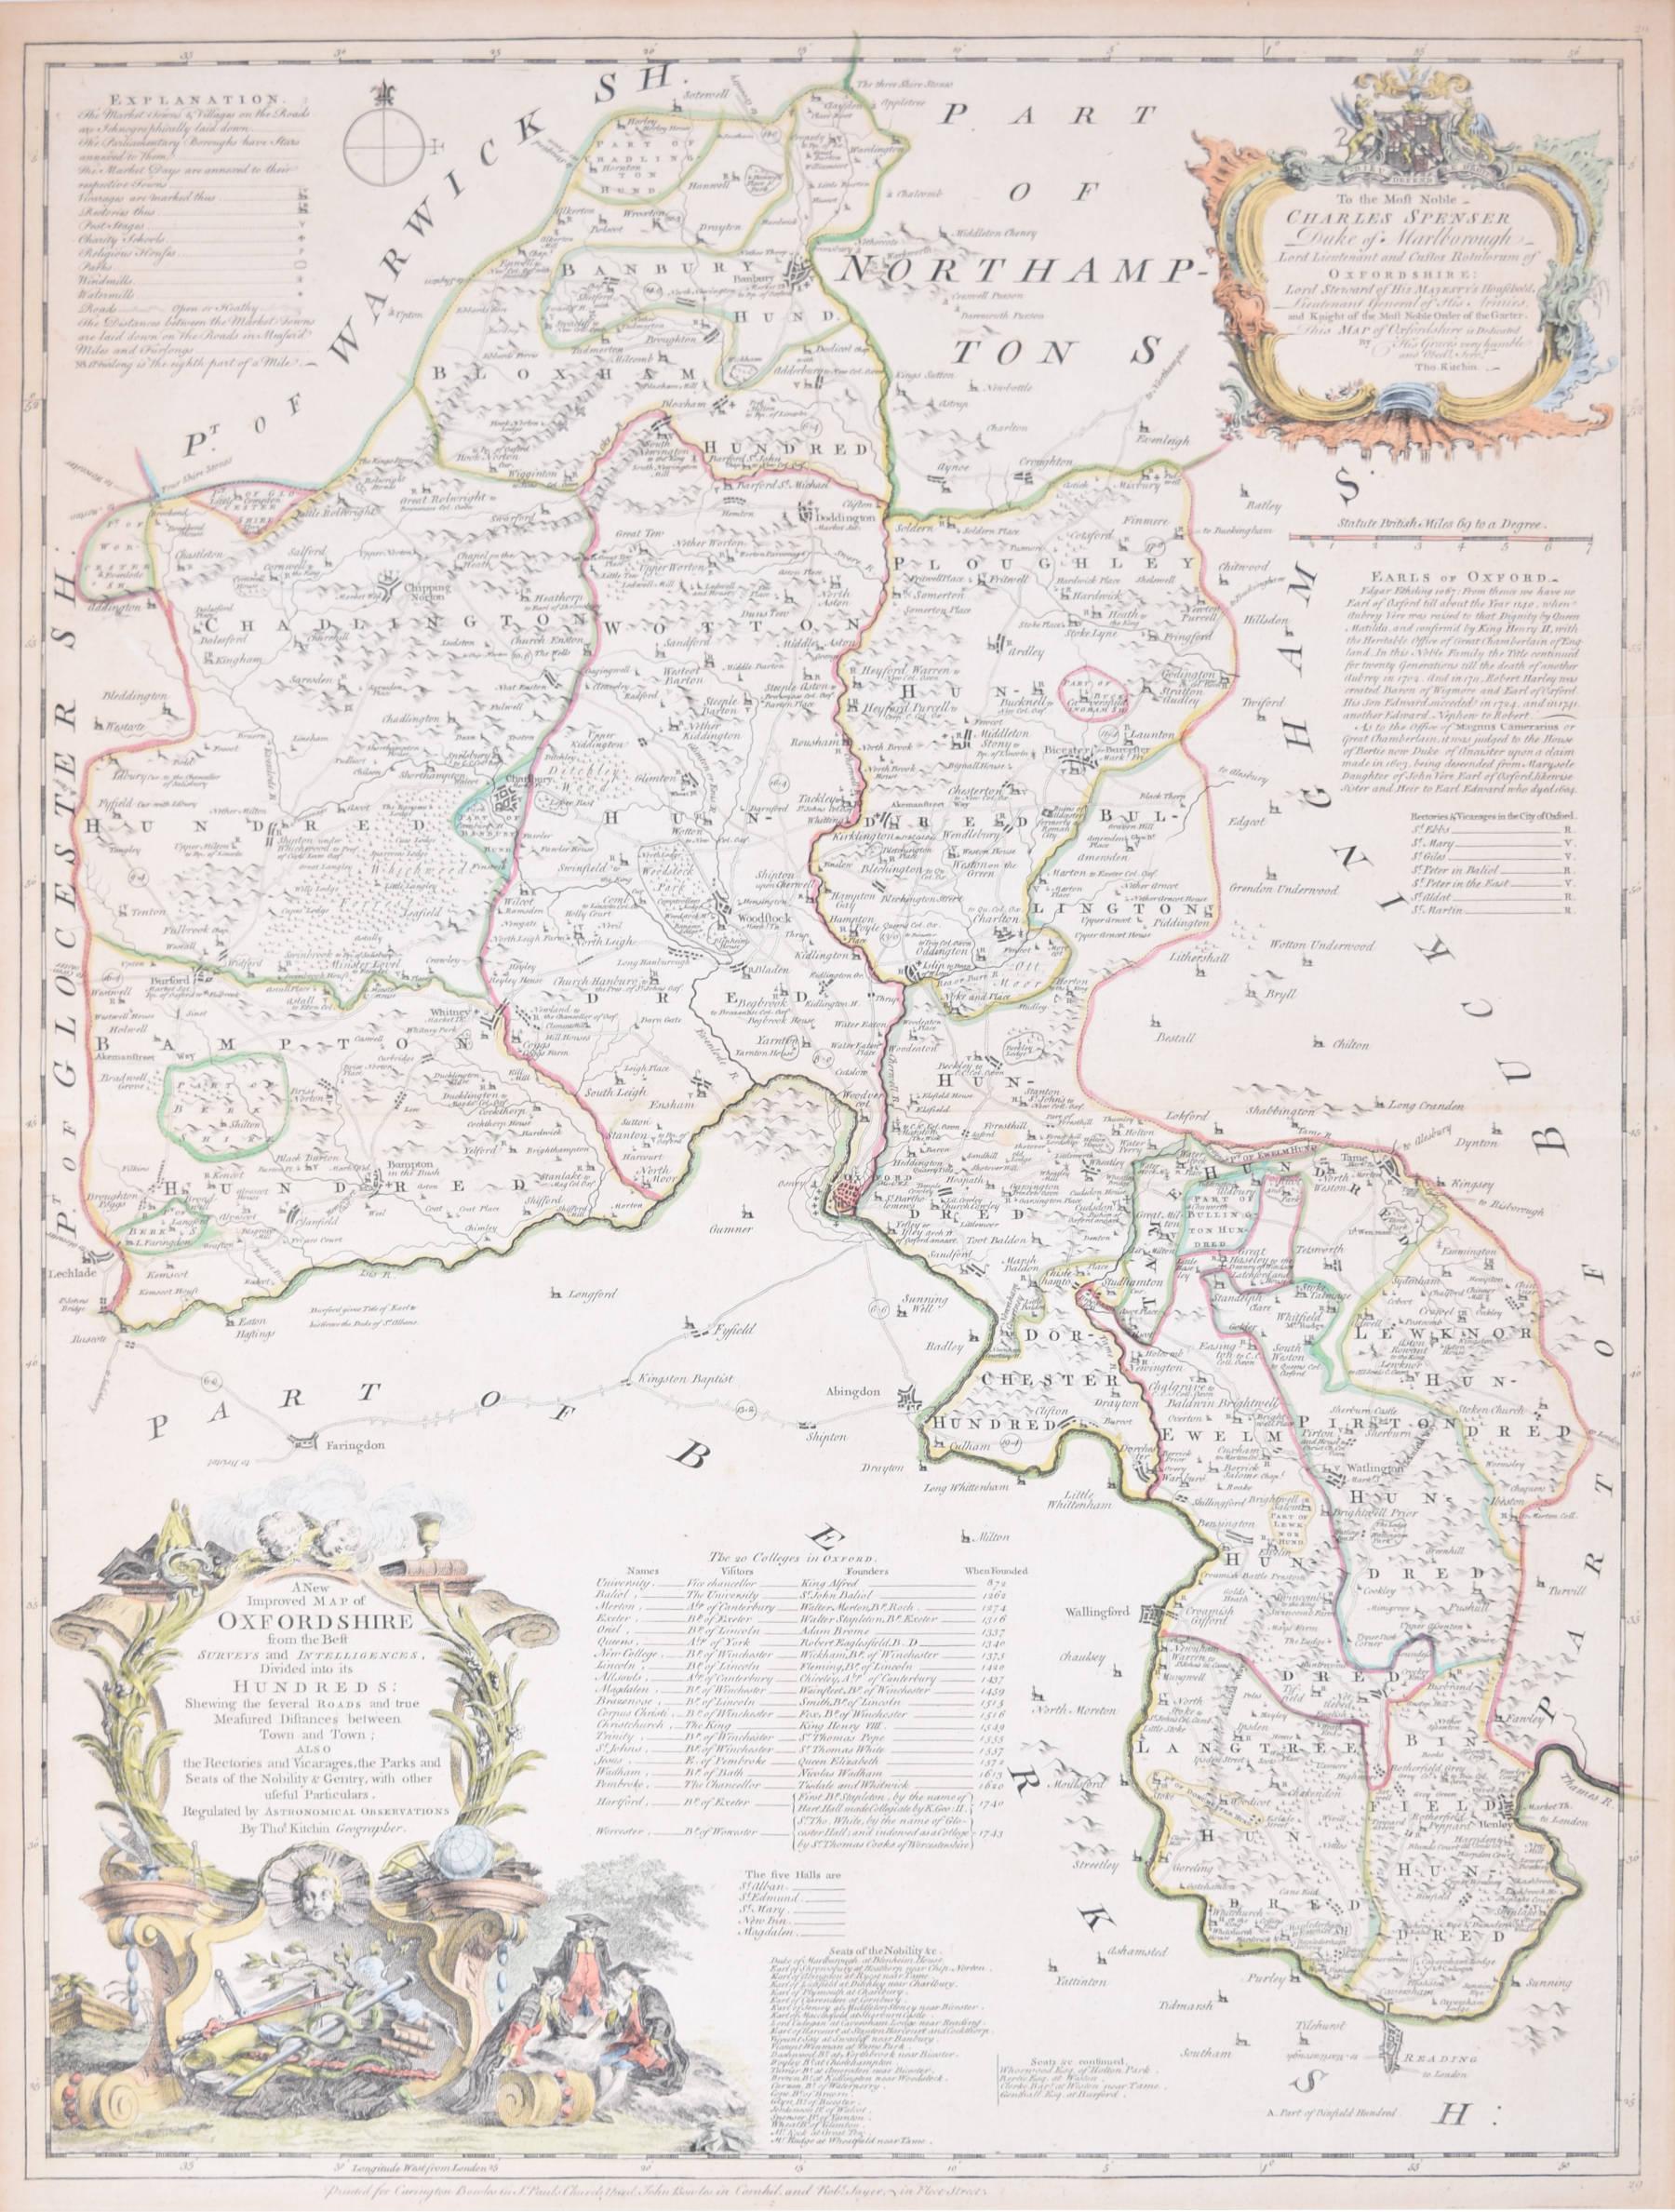 To see our other original maps, scroll down to "More from this Seller" and below it click on "See all from this Seller" - or send us a message if you cannot find the poster you want.

Thomas Kitchin (1719 - 1784)
Map of Oxfordshire (1764)
Engraving